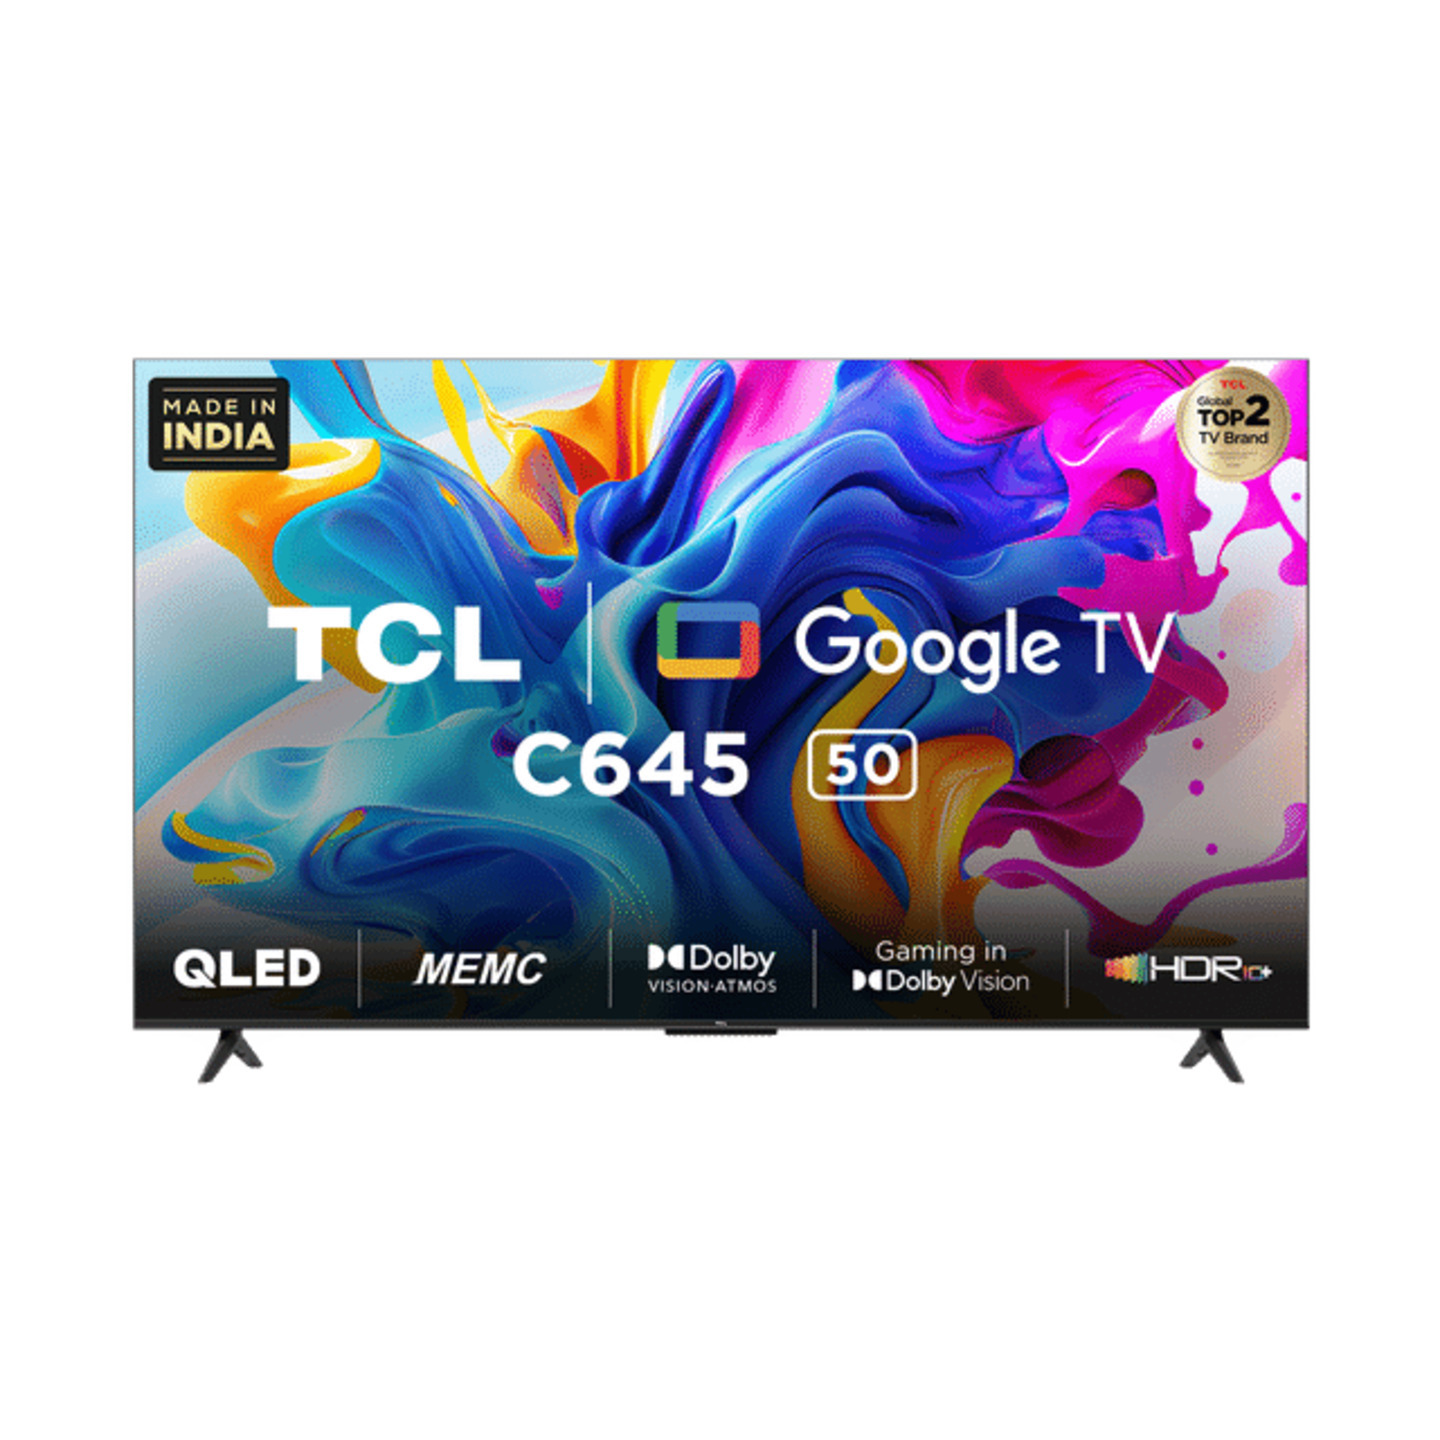 TCL C645 126 cm (50 inch) QLED 4K Ultra HD Google TV with Dolby Vision & Dolby Atmos